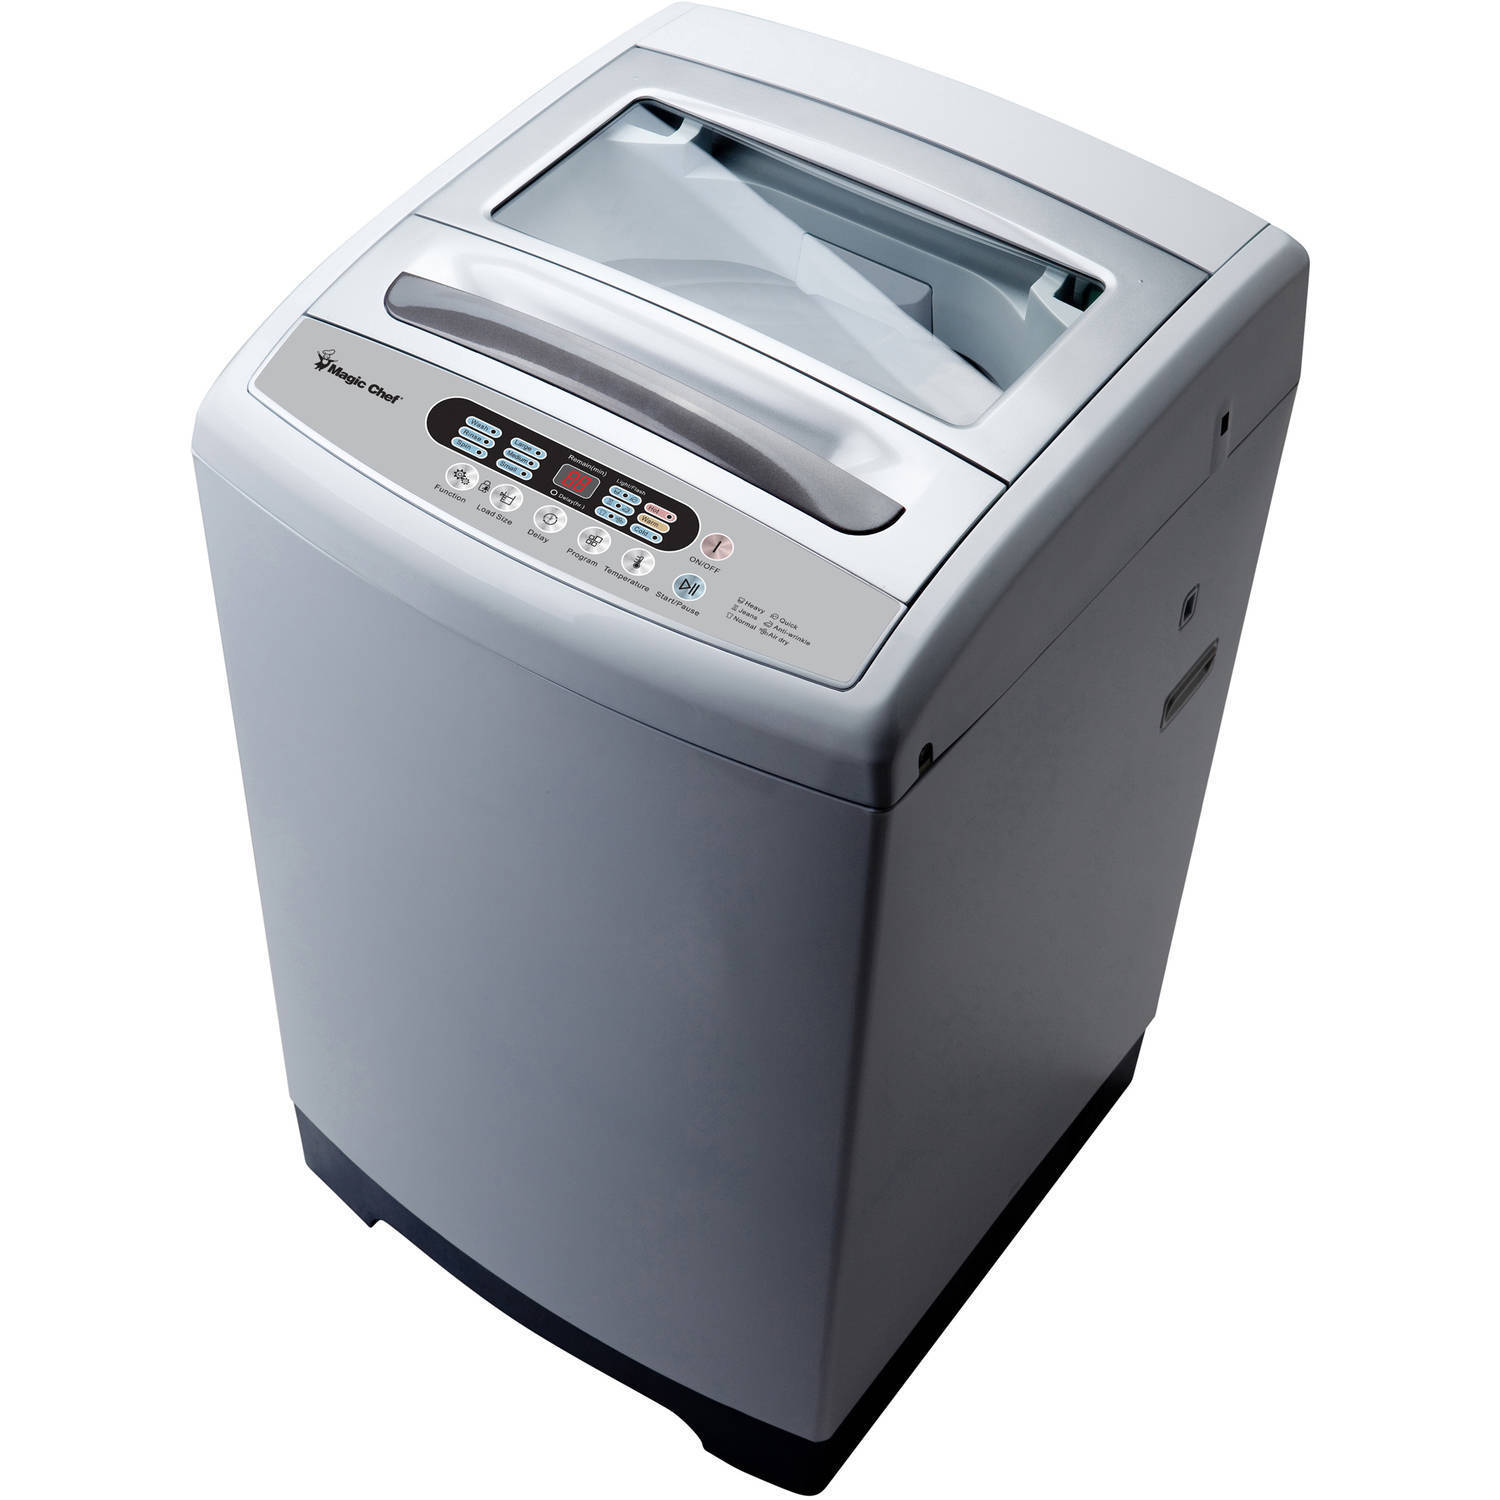 Magic Chef 1.6 cu. ft. Top Load Portable Washer - image 2 of 3